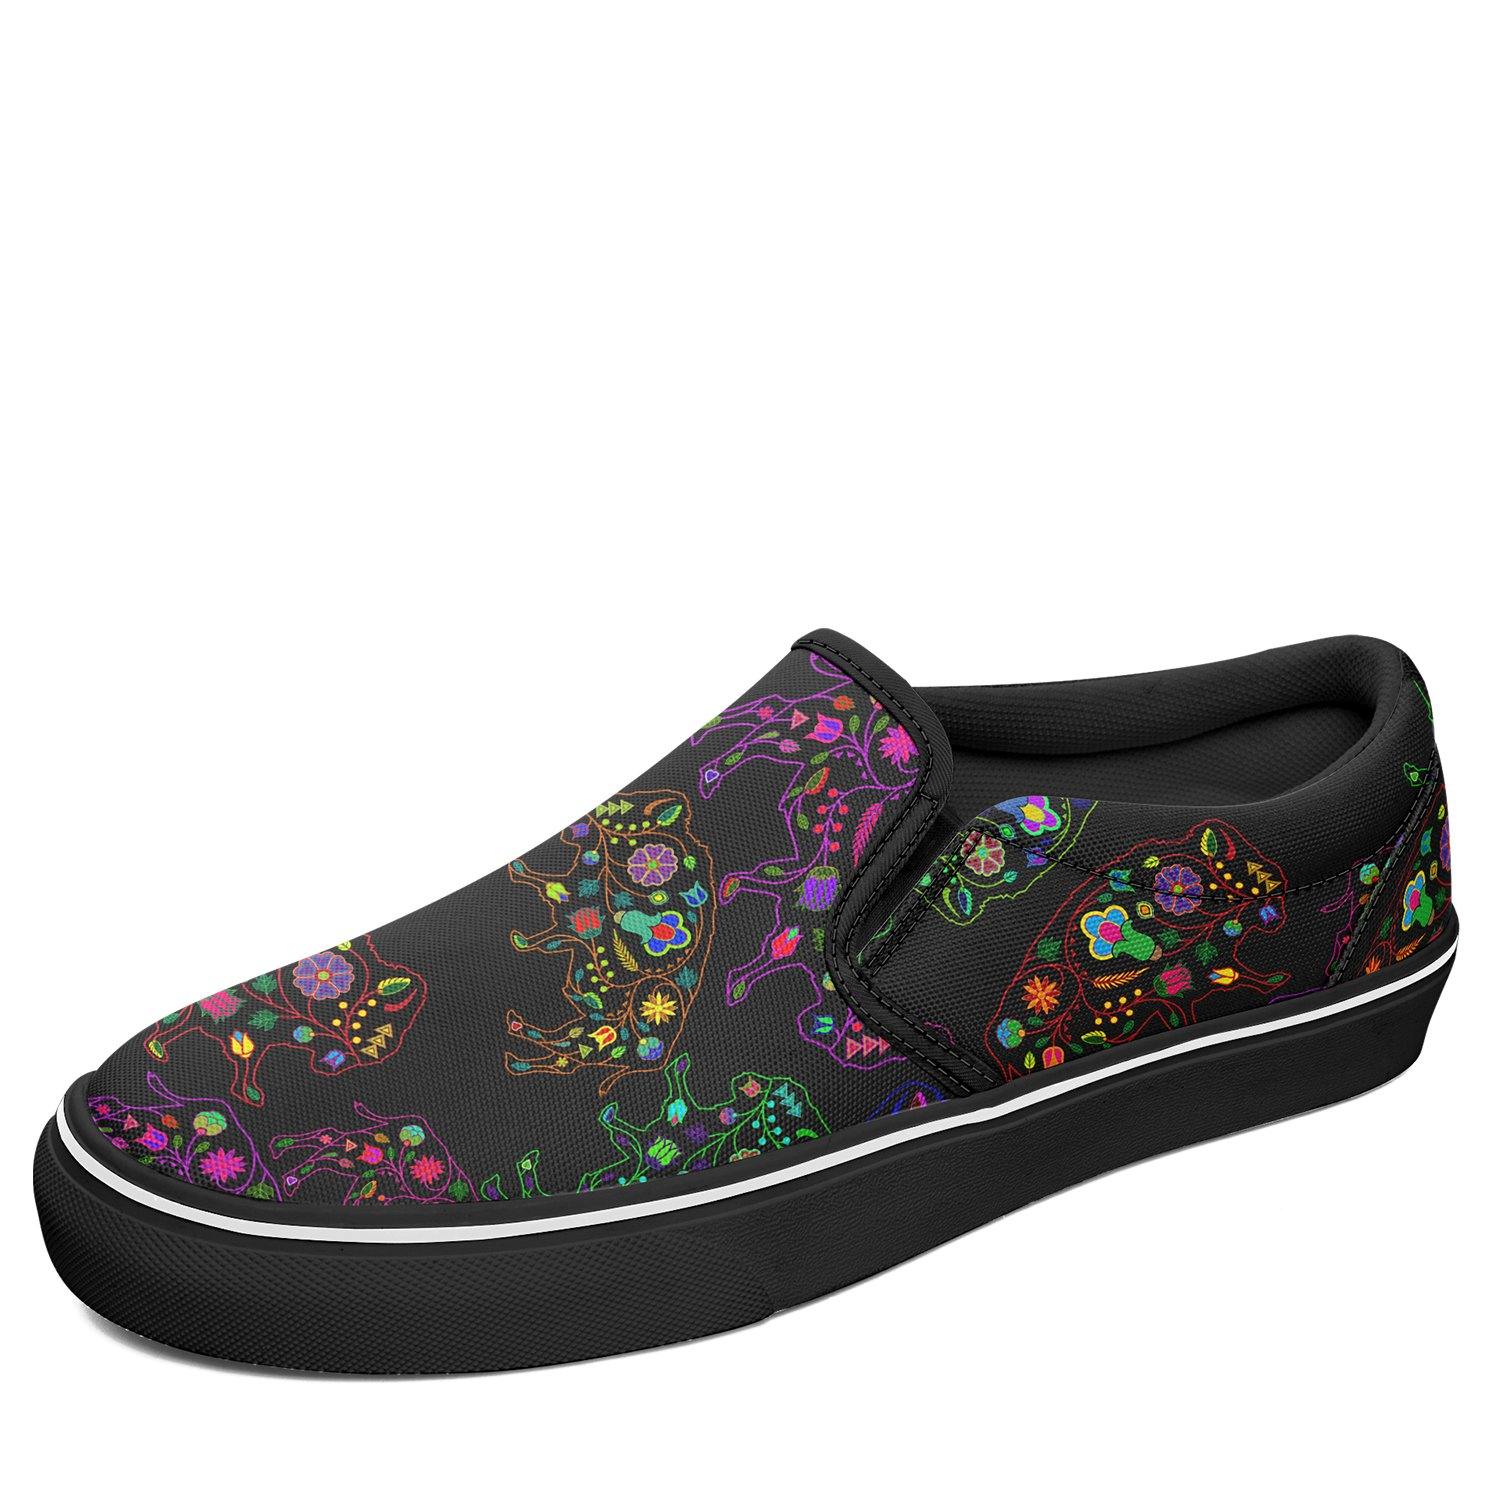 Floral Buffalo Otoyimm Canvas Slip On Shoes otoyimm Herman US Youth 1 / EUR 32 Black Sole 